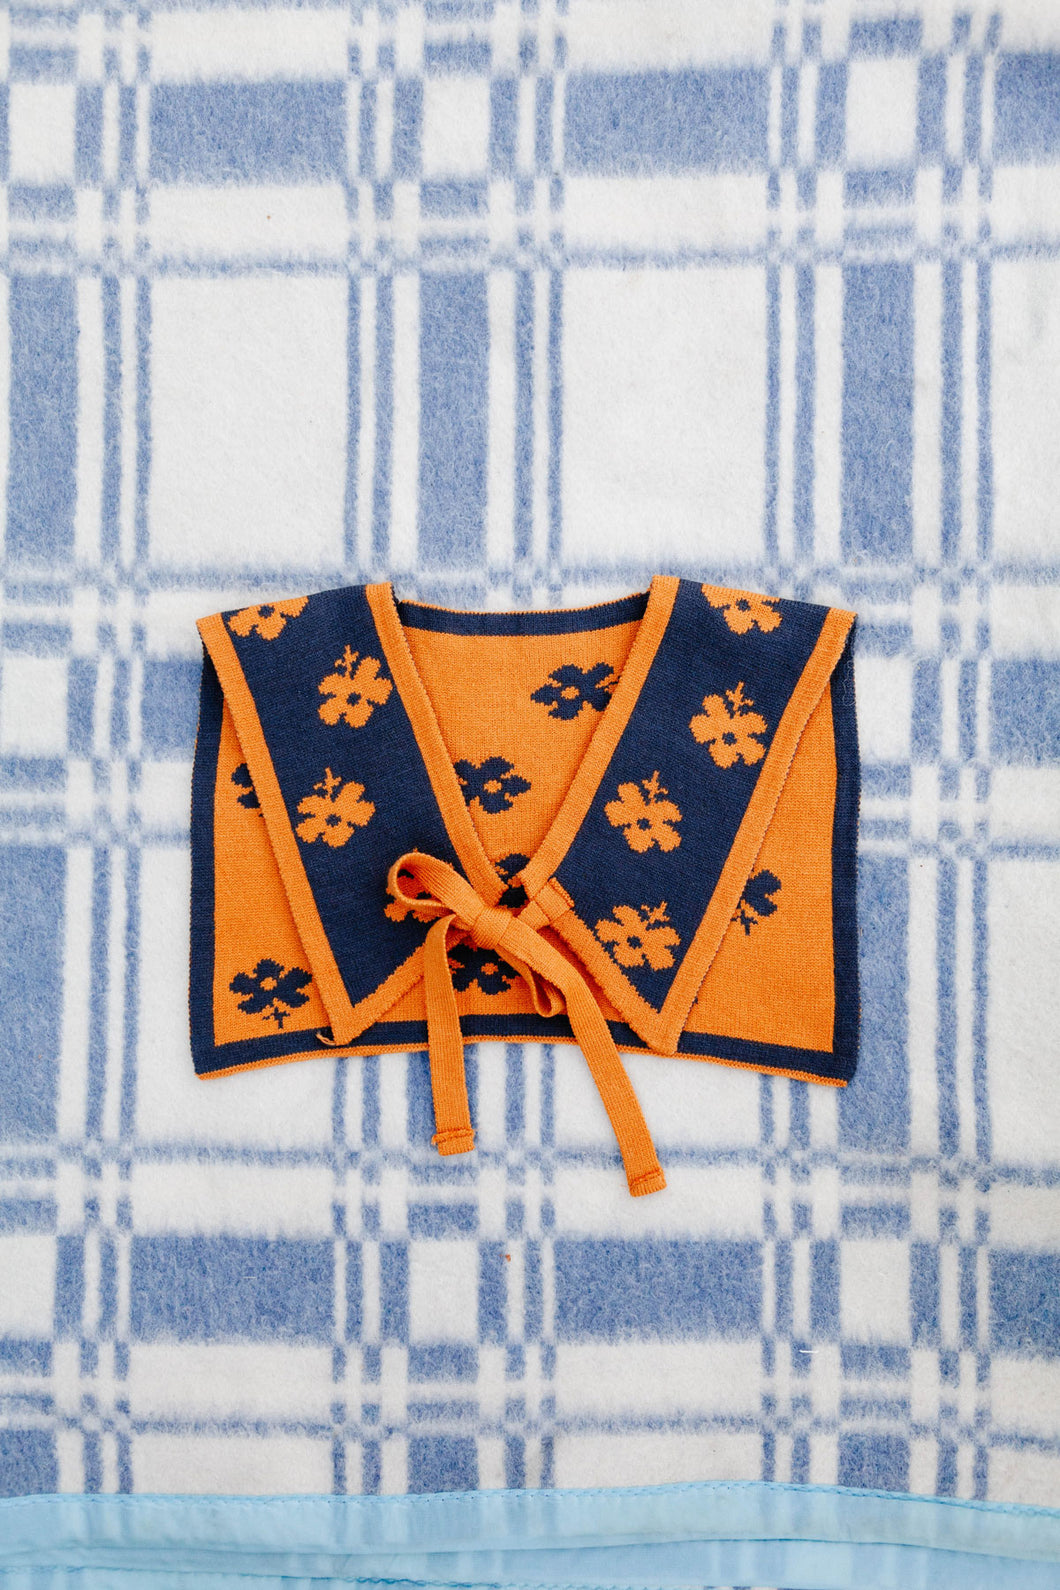 Faux Collar - Floral Amber Orange, Navy - Double Sided